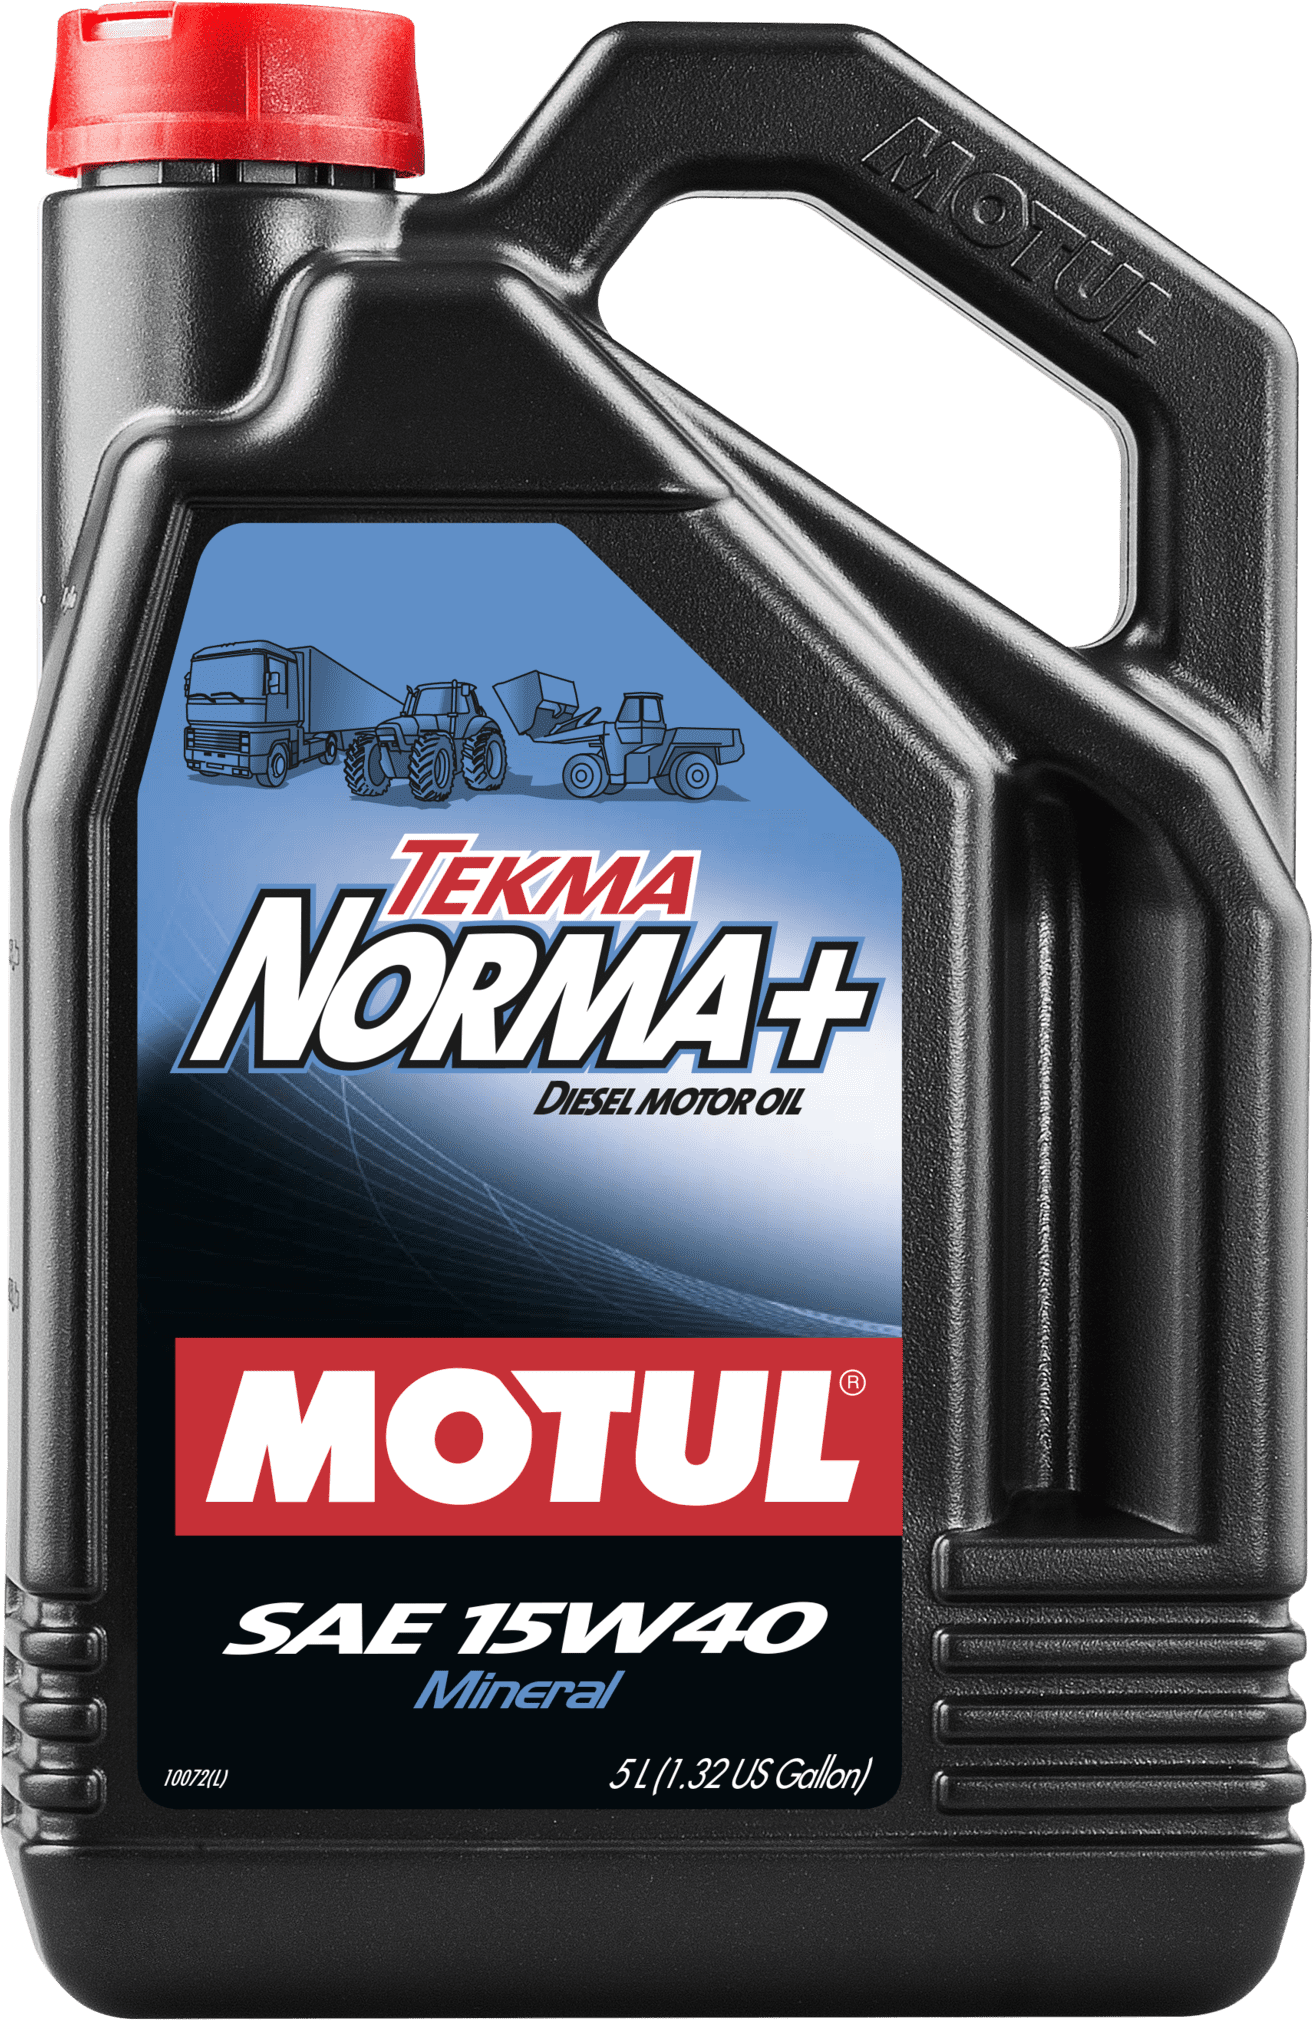 102021-5 Lubricant for all diesel engines (naturally aspirated or turbocharged).